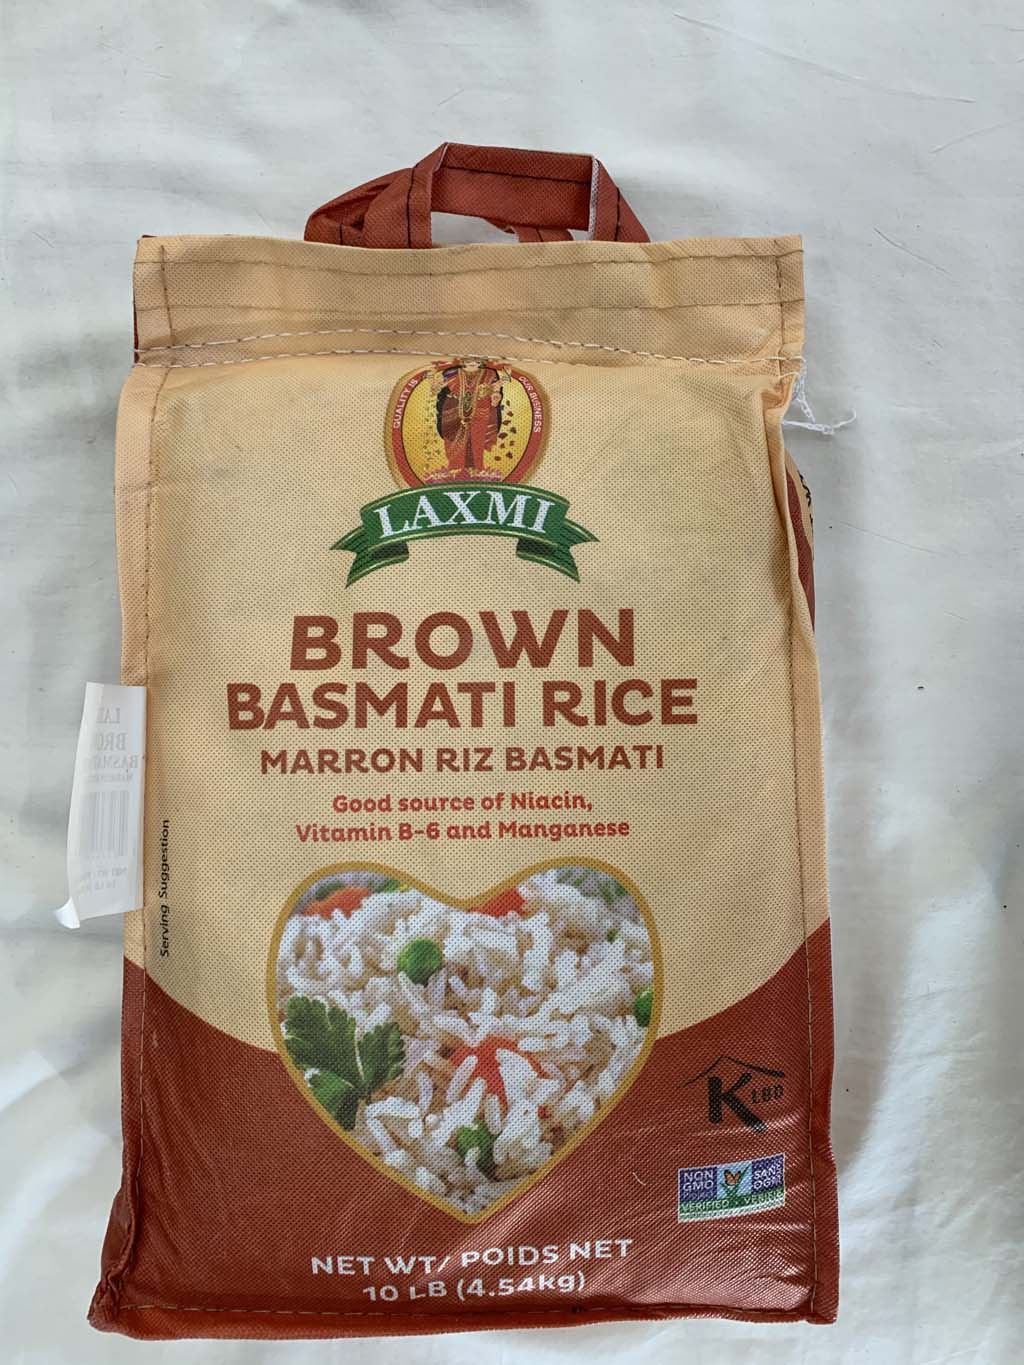 Laxmi Brown Basmati Rice 10LB - Indian Grocery Store | Bombay Spiceland ...